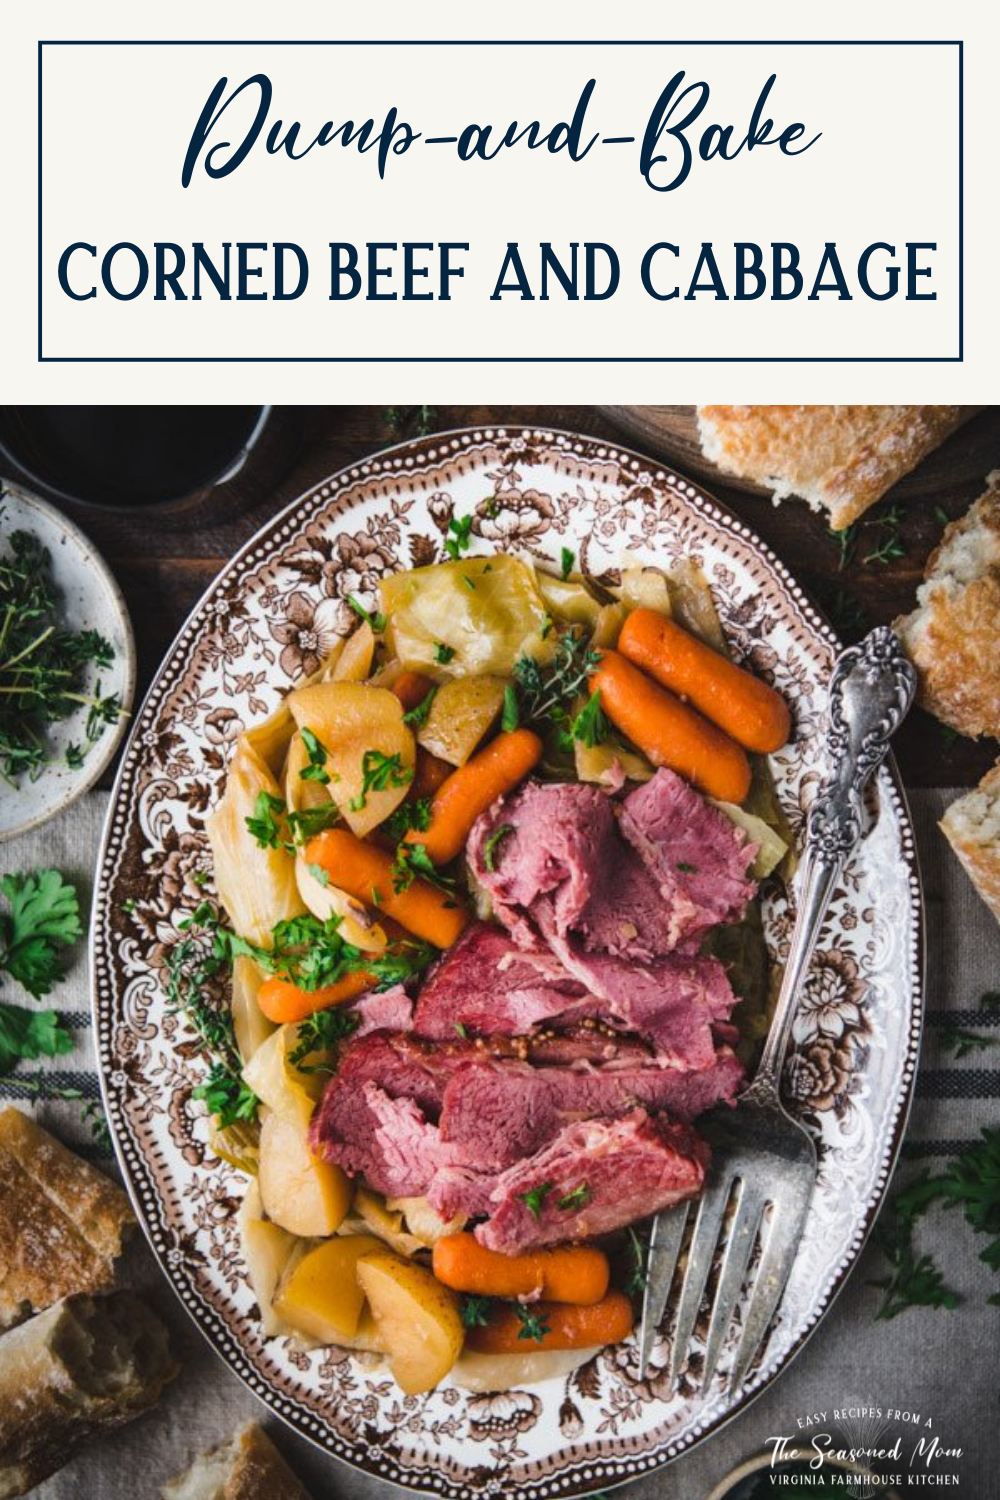 Overhead image of a platter of corned beef and cabbage on a dinner table with a side of bread and text title box at top.